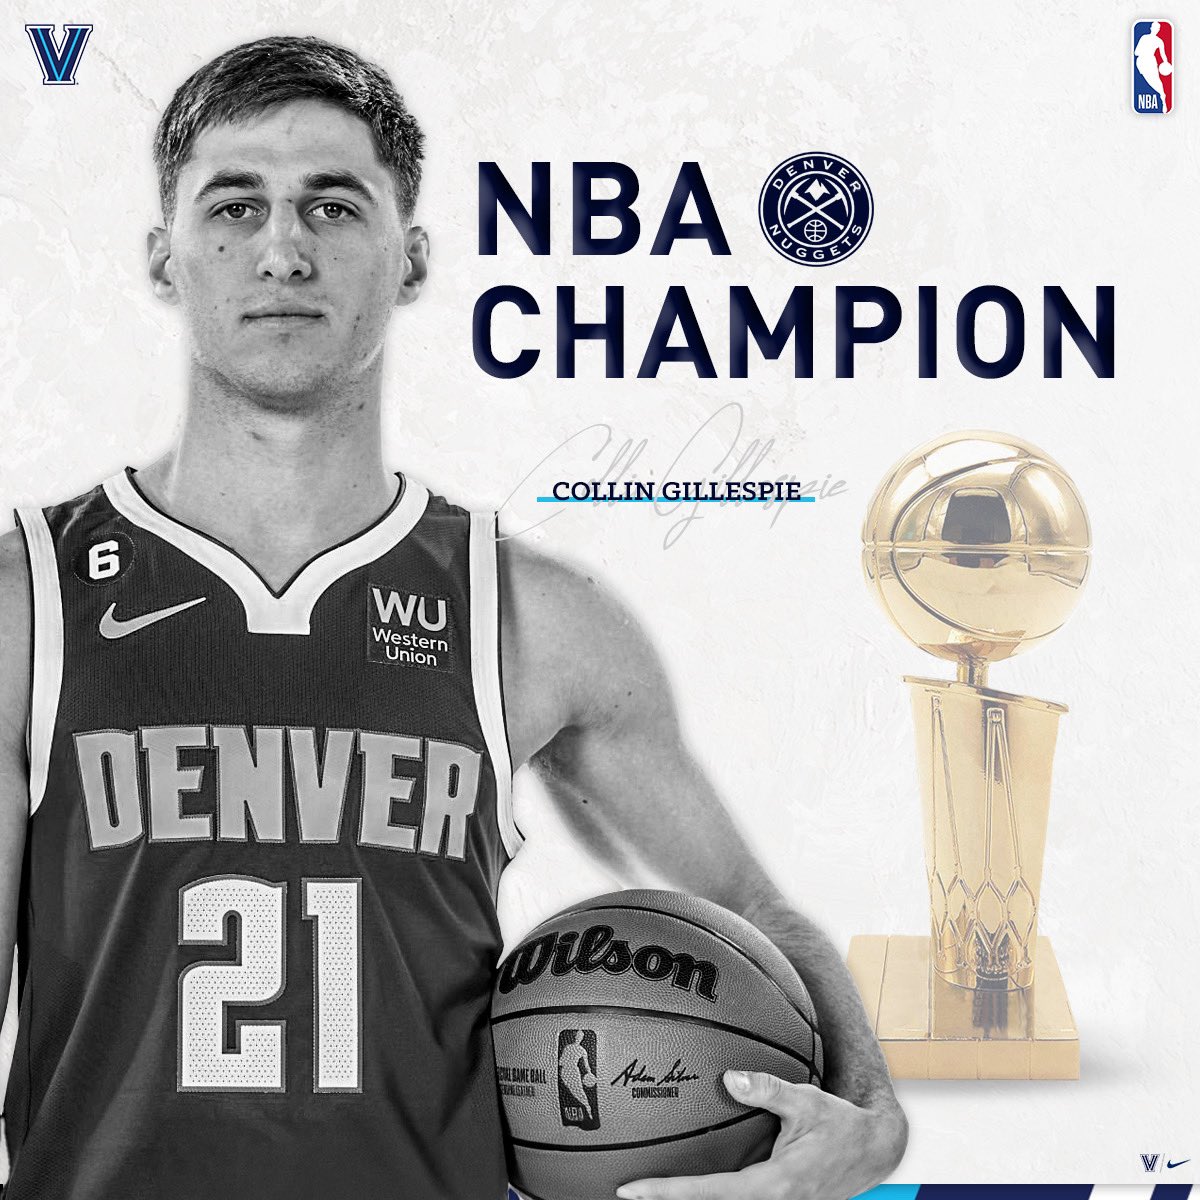 Congratulations to our guy @Colling1021 and the @nuggets !!!

#OnceAWildcatAlwaysAWildcat  
✌️🔵⚪️😼💍